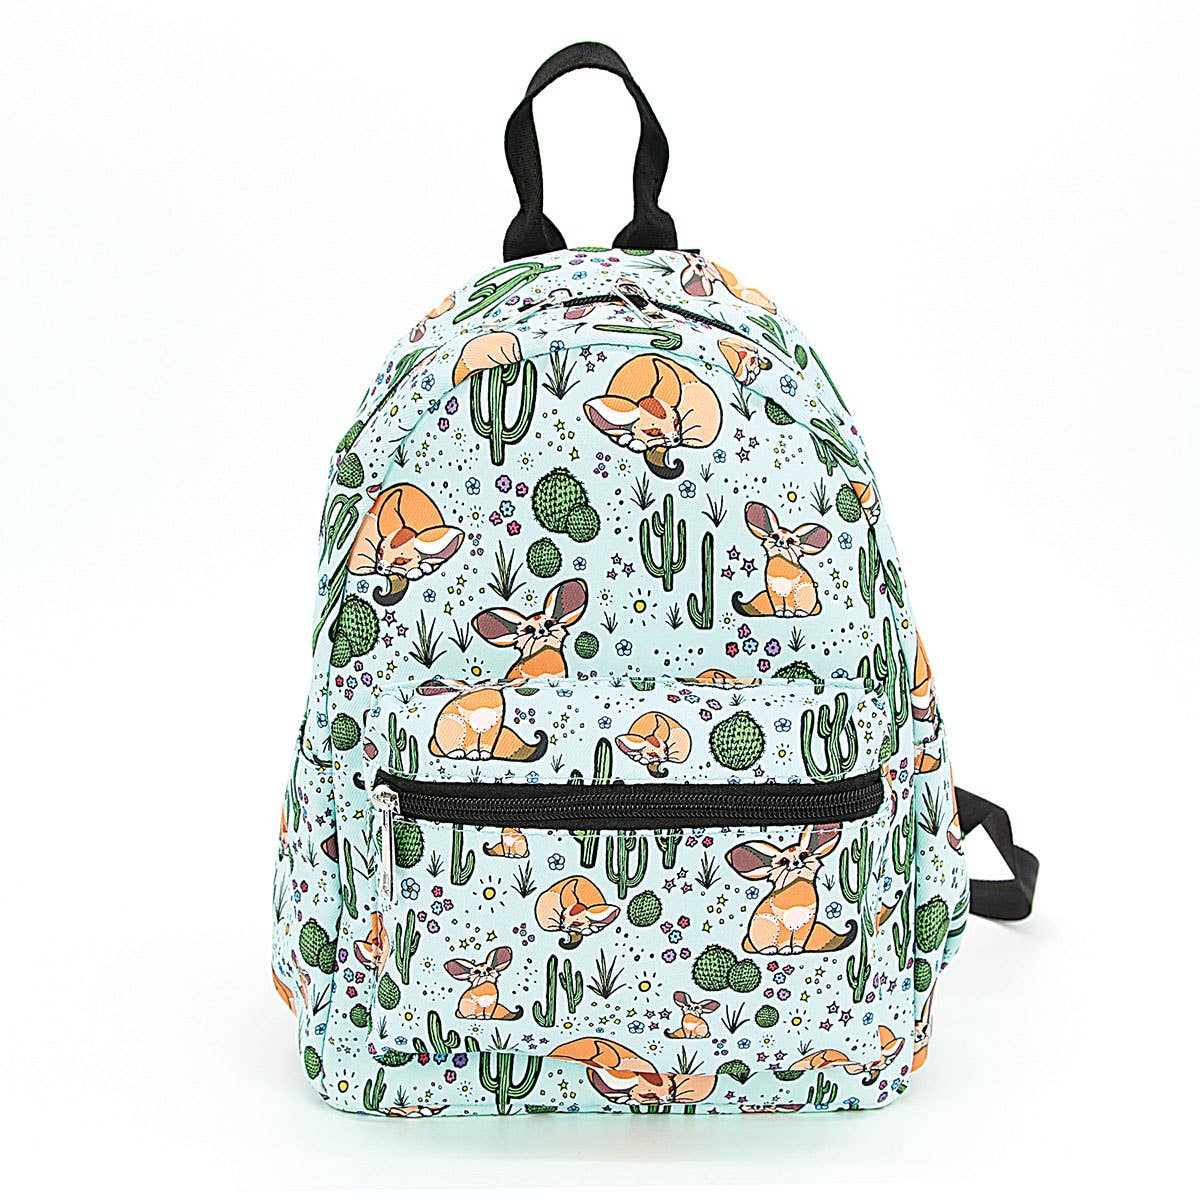 FENNEC FOX MINI BACKPACK IN POLYESTER